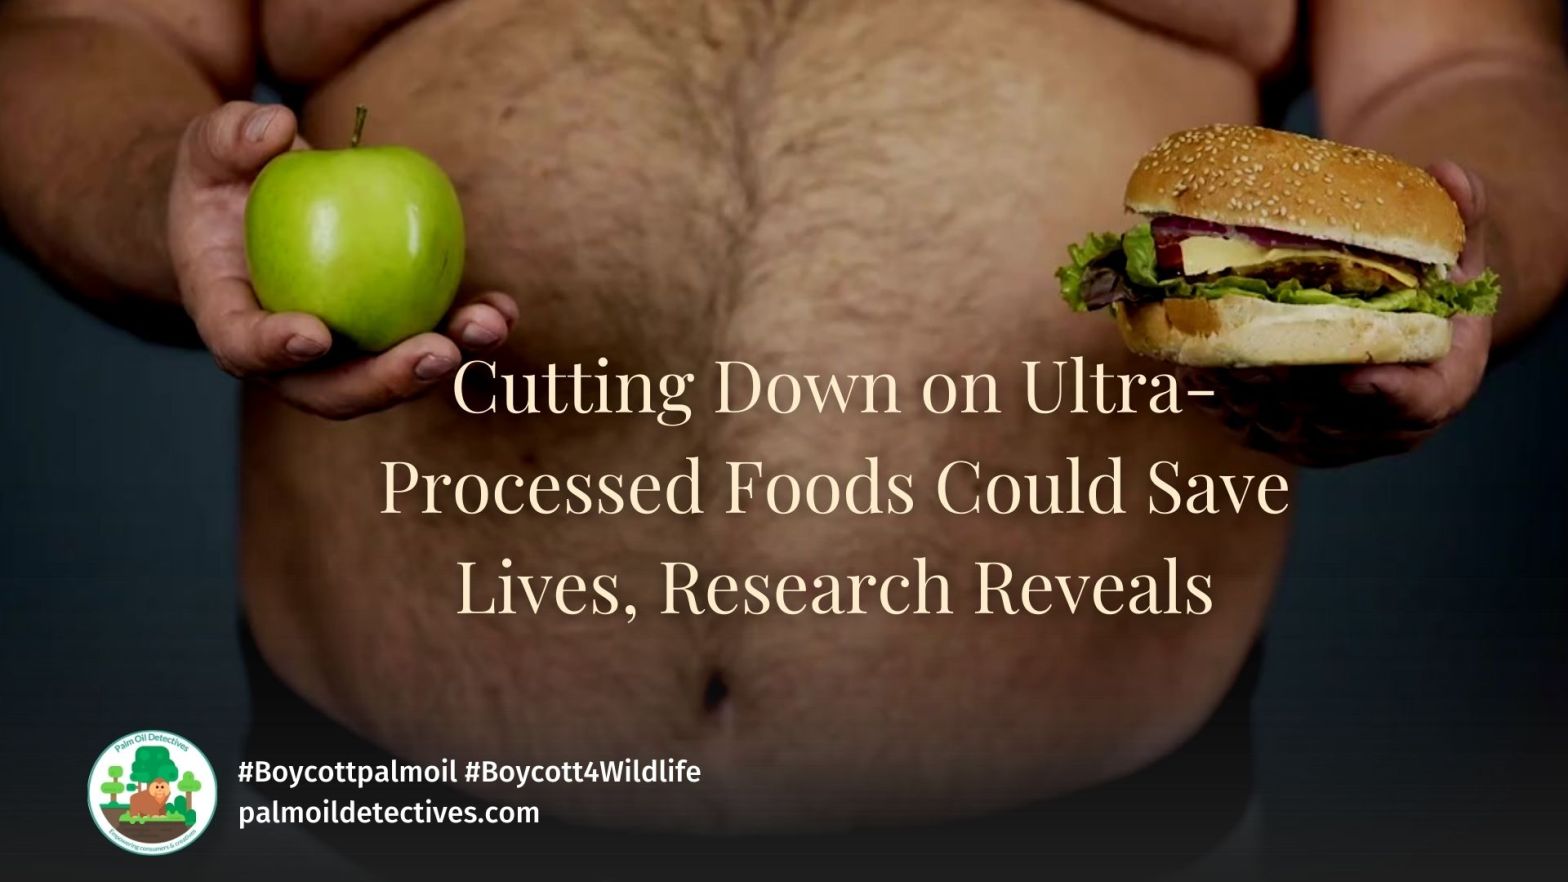 Cutting Down on Ultra-Processed Foods Could Save Lives, Research Reveals 1